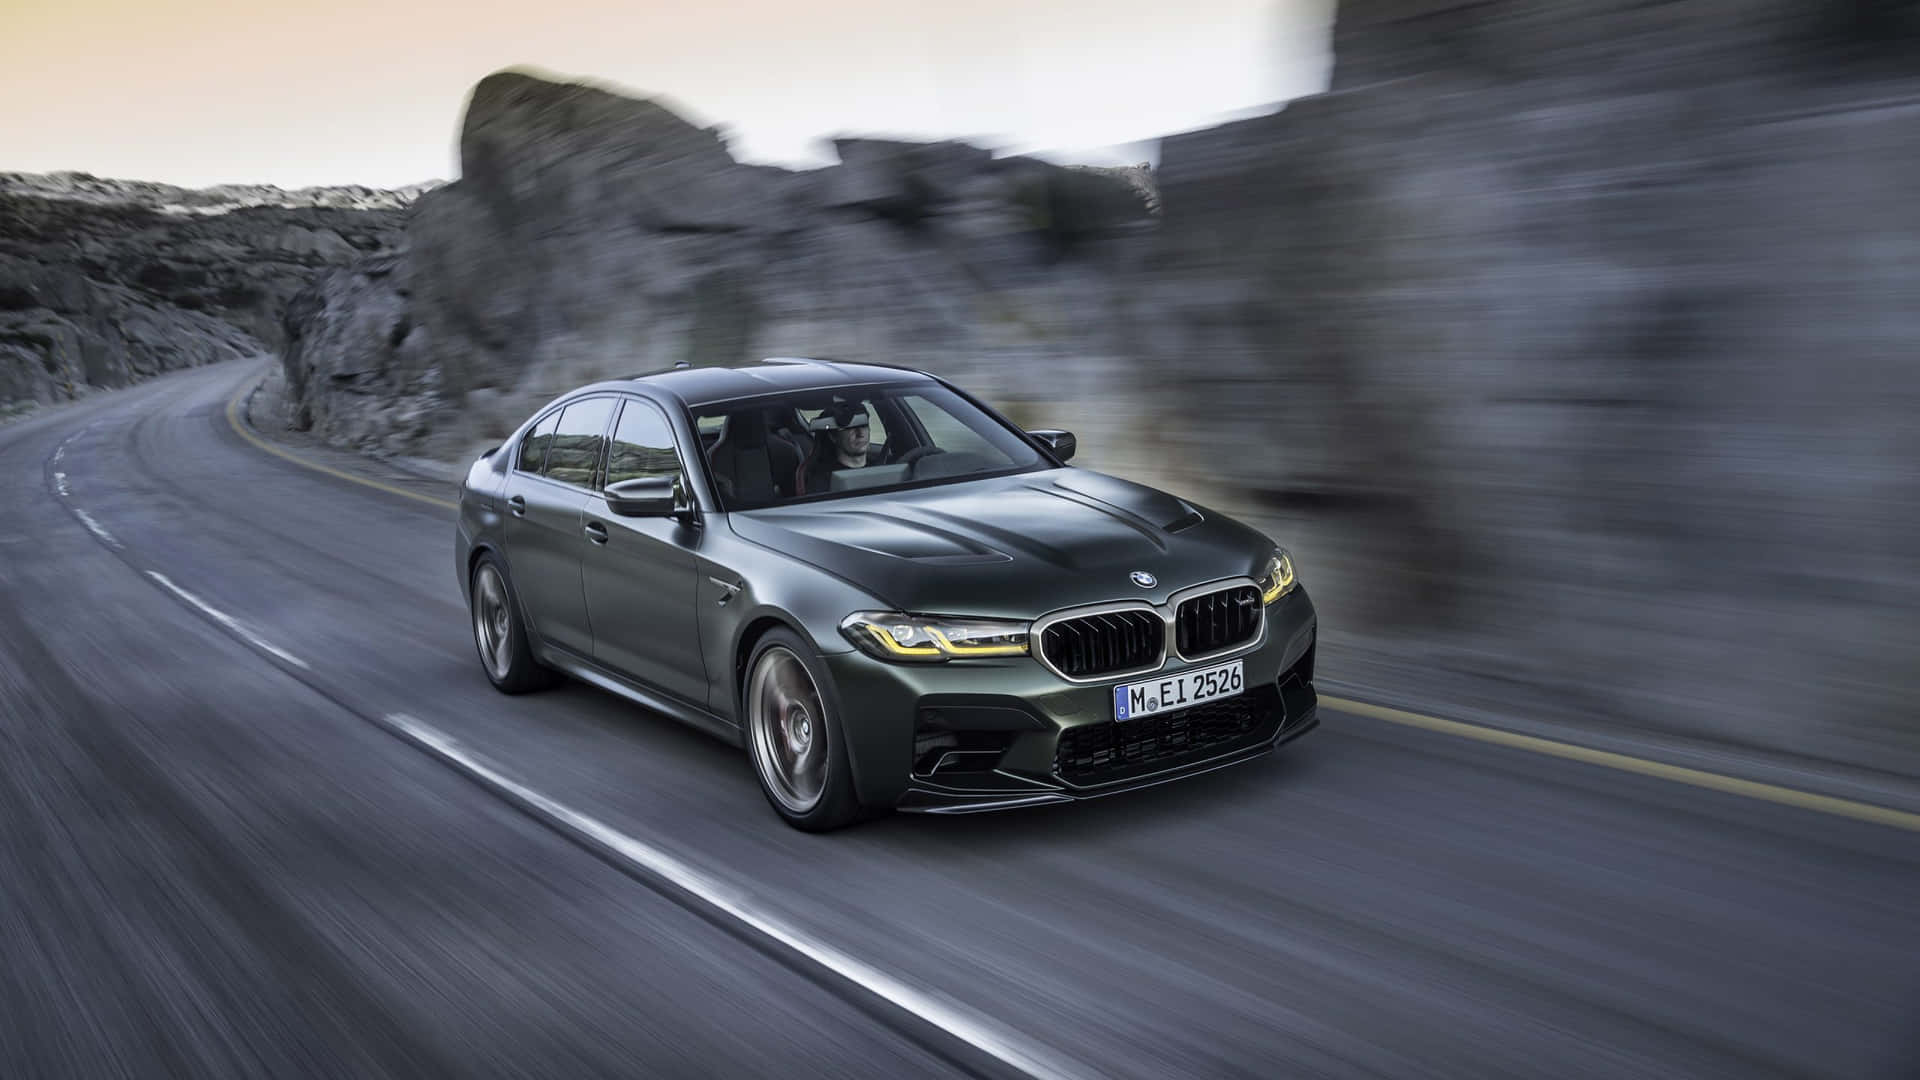 Experience the Power of the BMW M5 Wallpaper